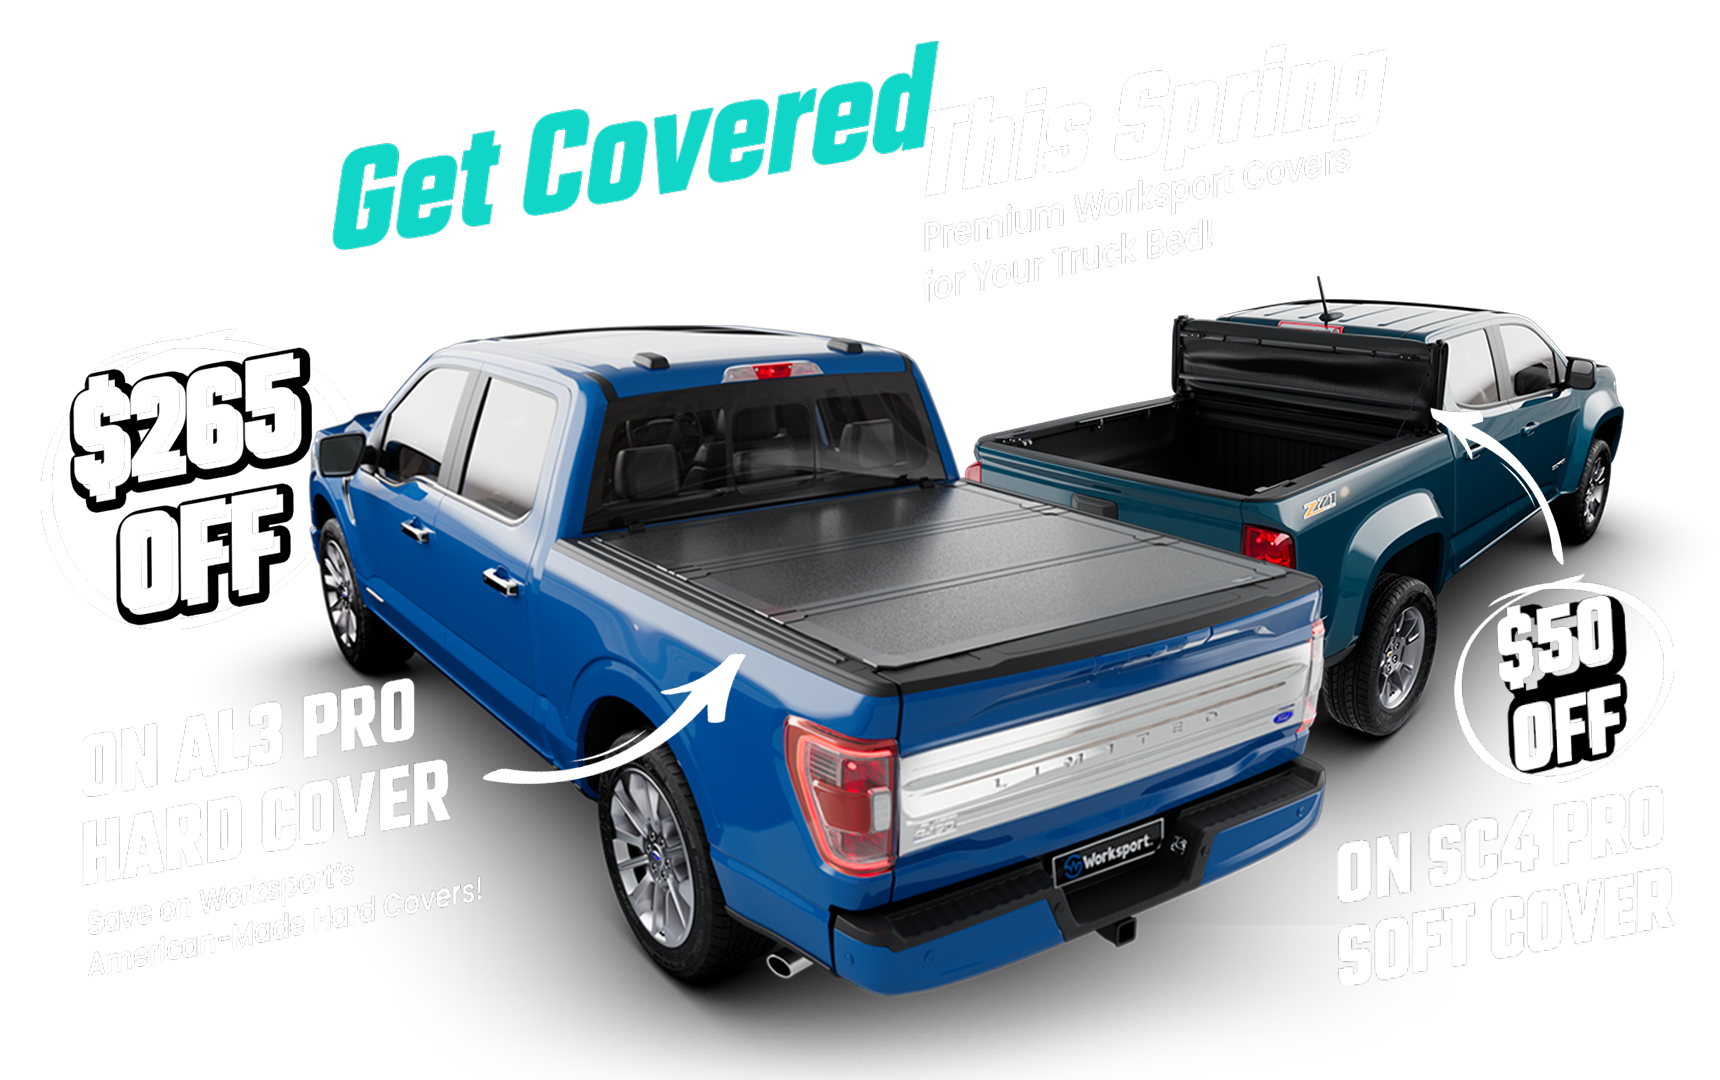 Spring sale - $265 off AL3 Pro Hard Cover and $50 off SC4 Pro Soft Cover